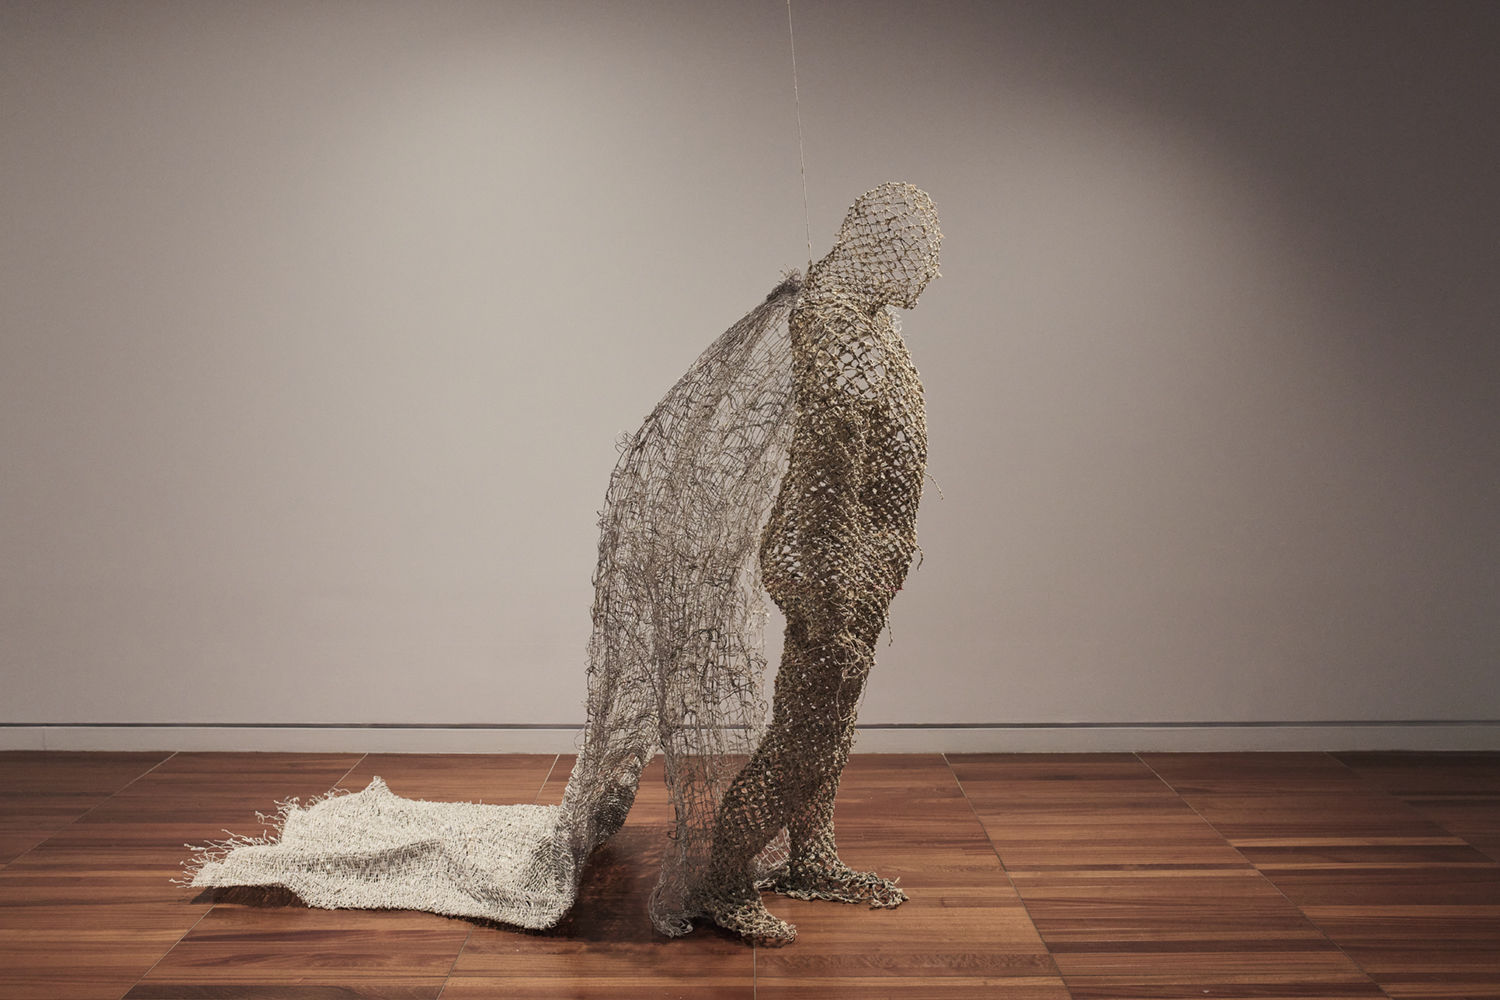 Karen Trask: Hanging By A Thread